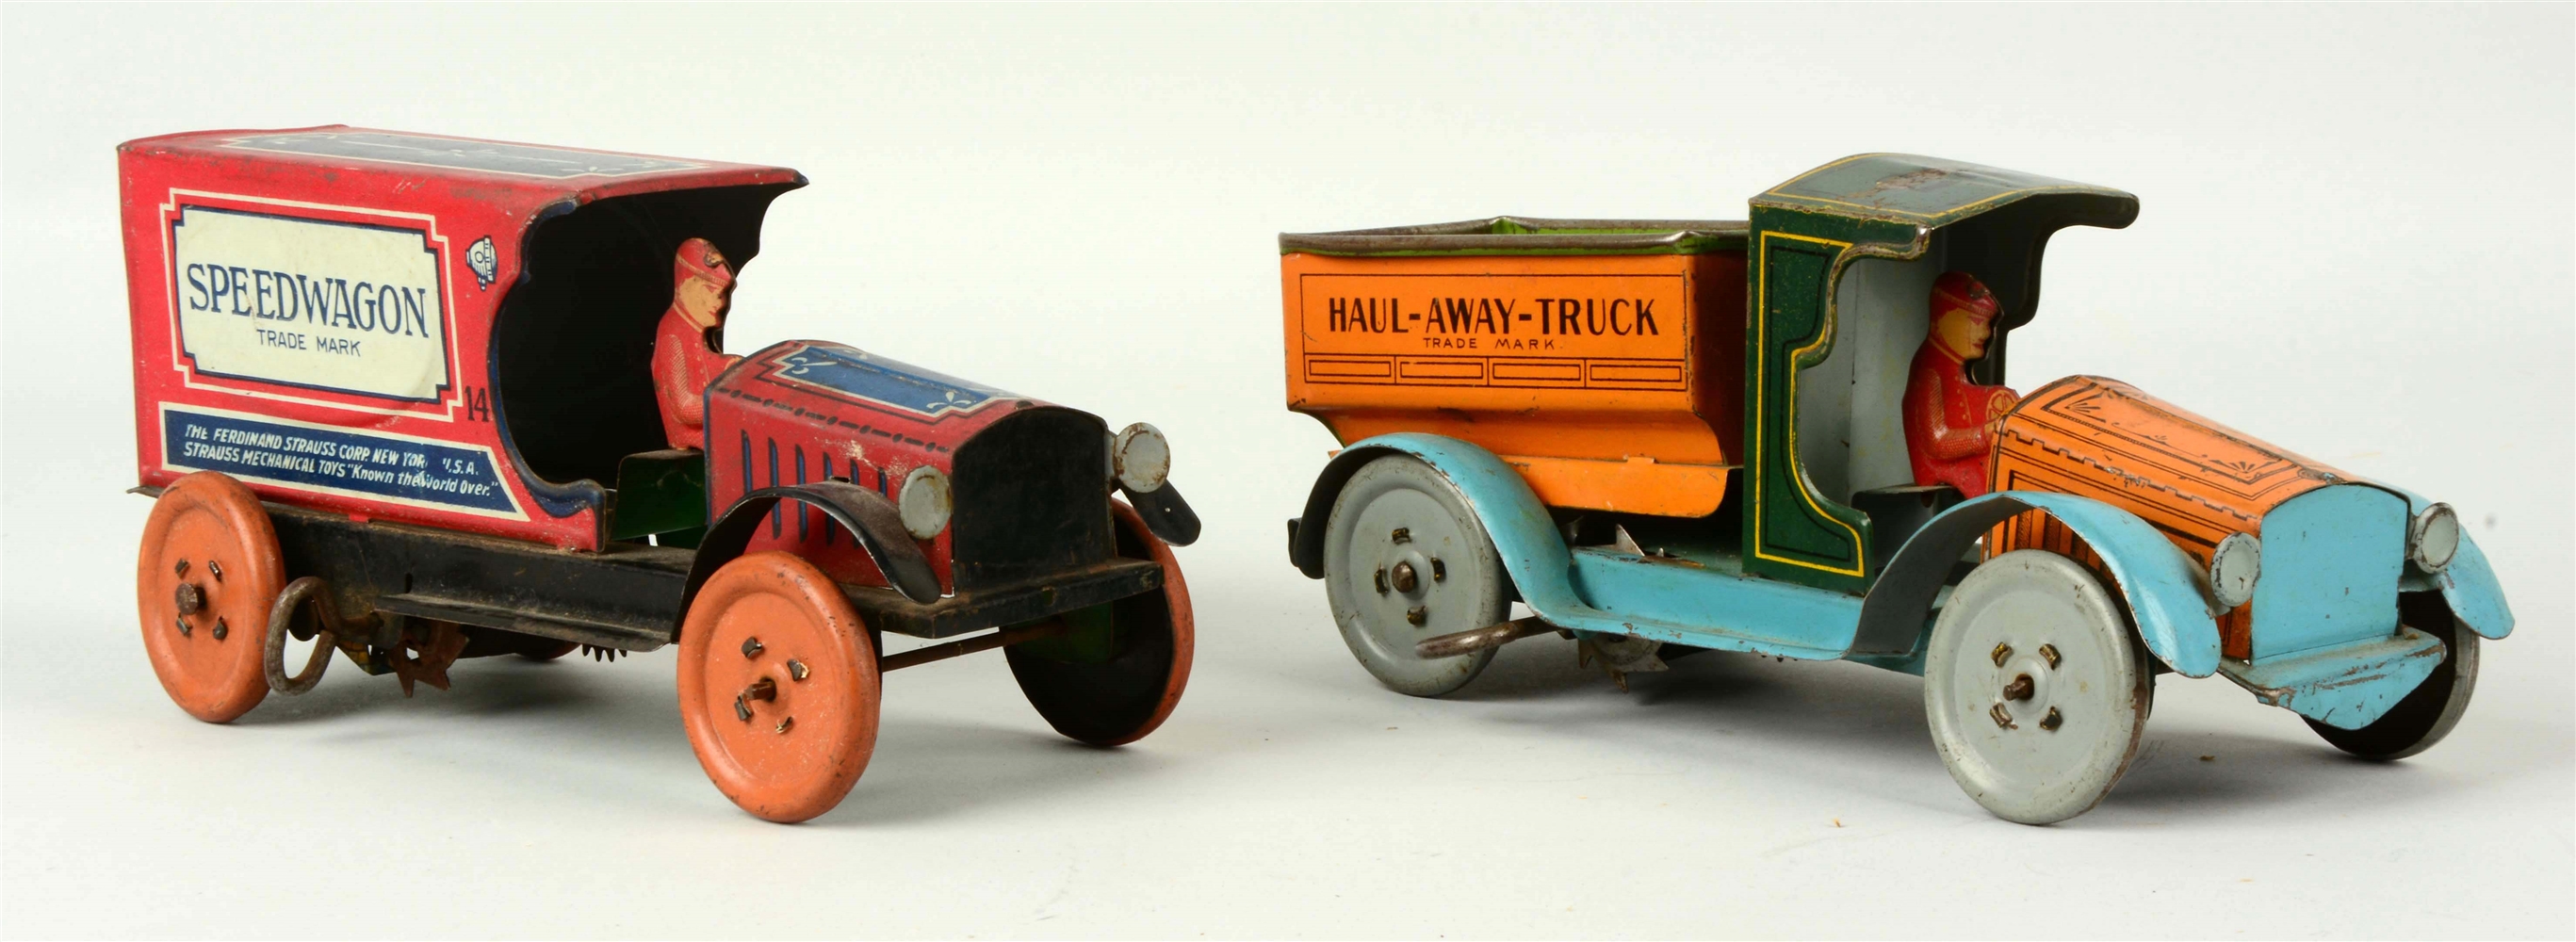 LOT OF 2: STRAUSS TIN LITHO WIND UP VEHICLE TOYS.